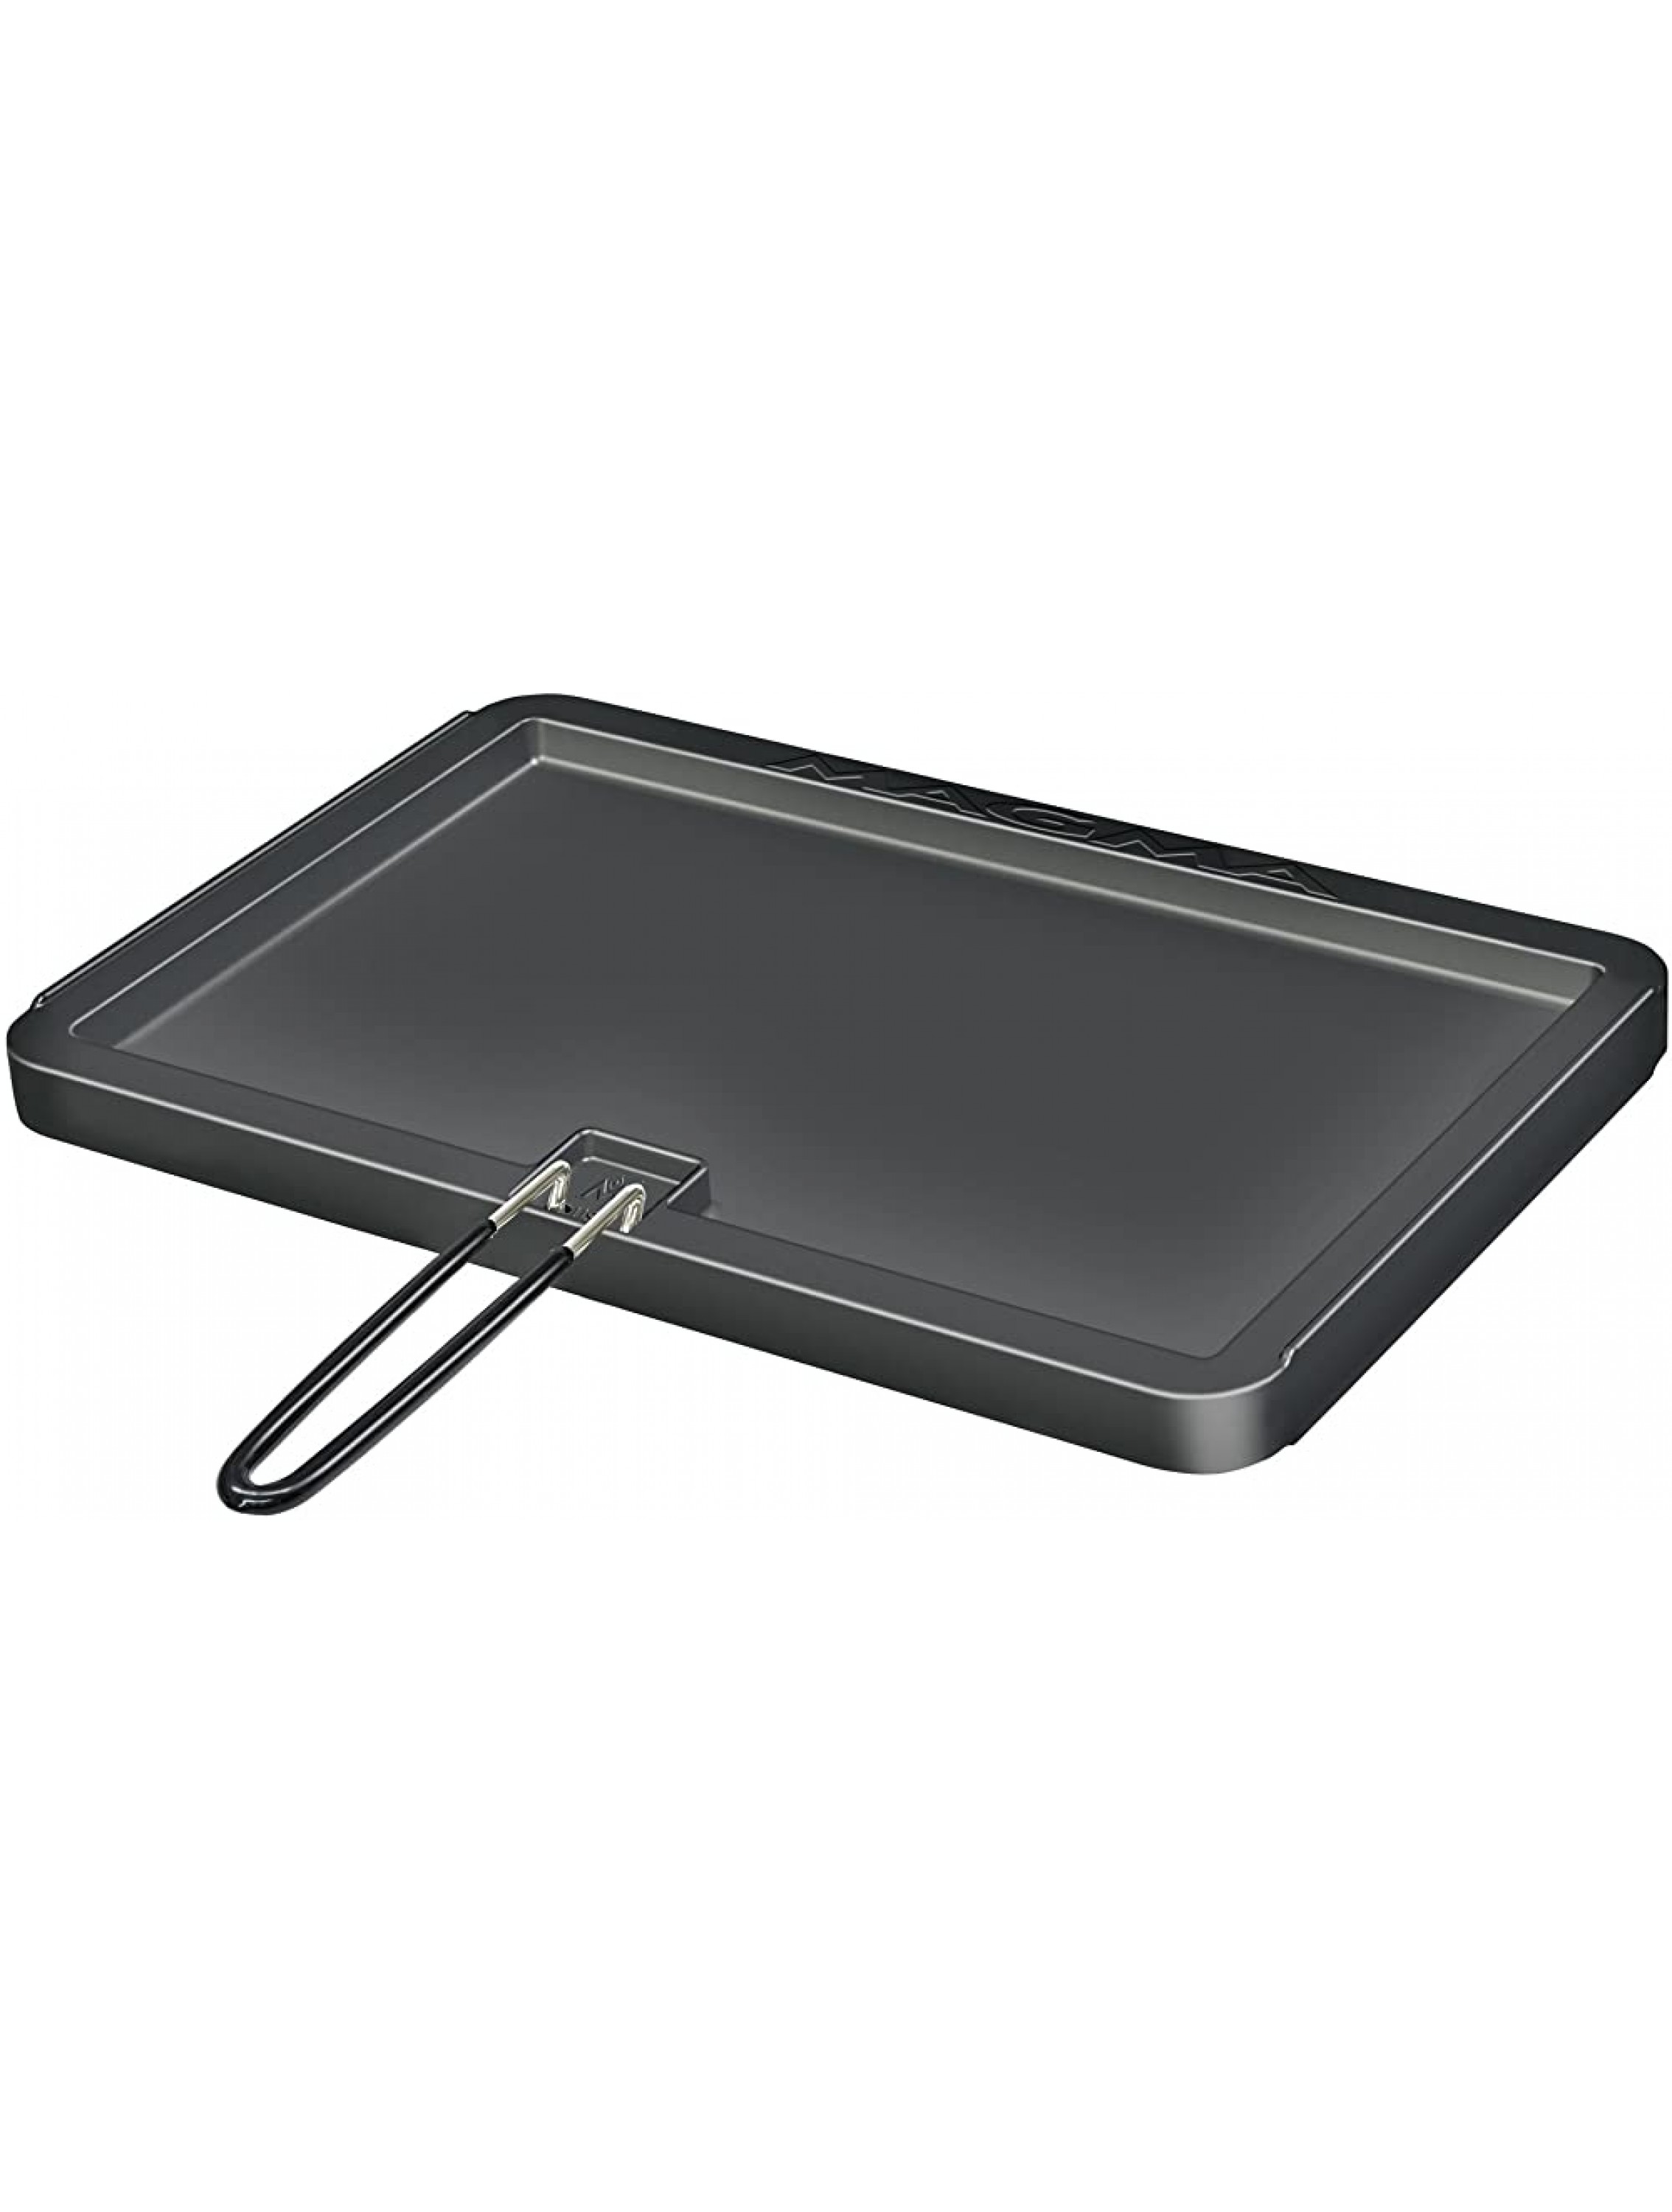 MAGMA Products A10-197 Reversible Non-Stick Griddle 11 X 17 - B6H2W1HOY